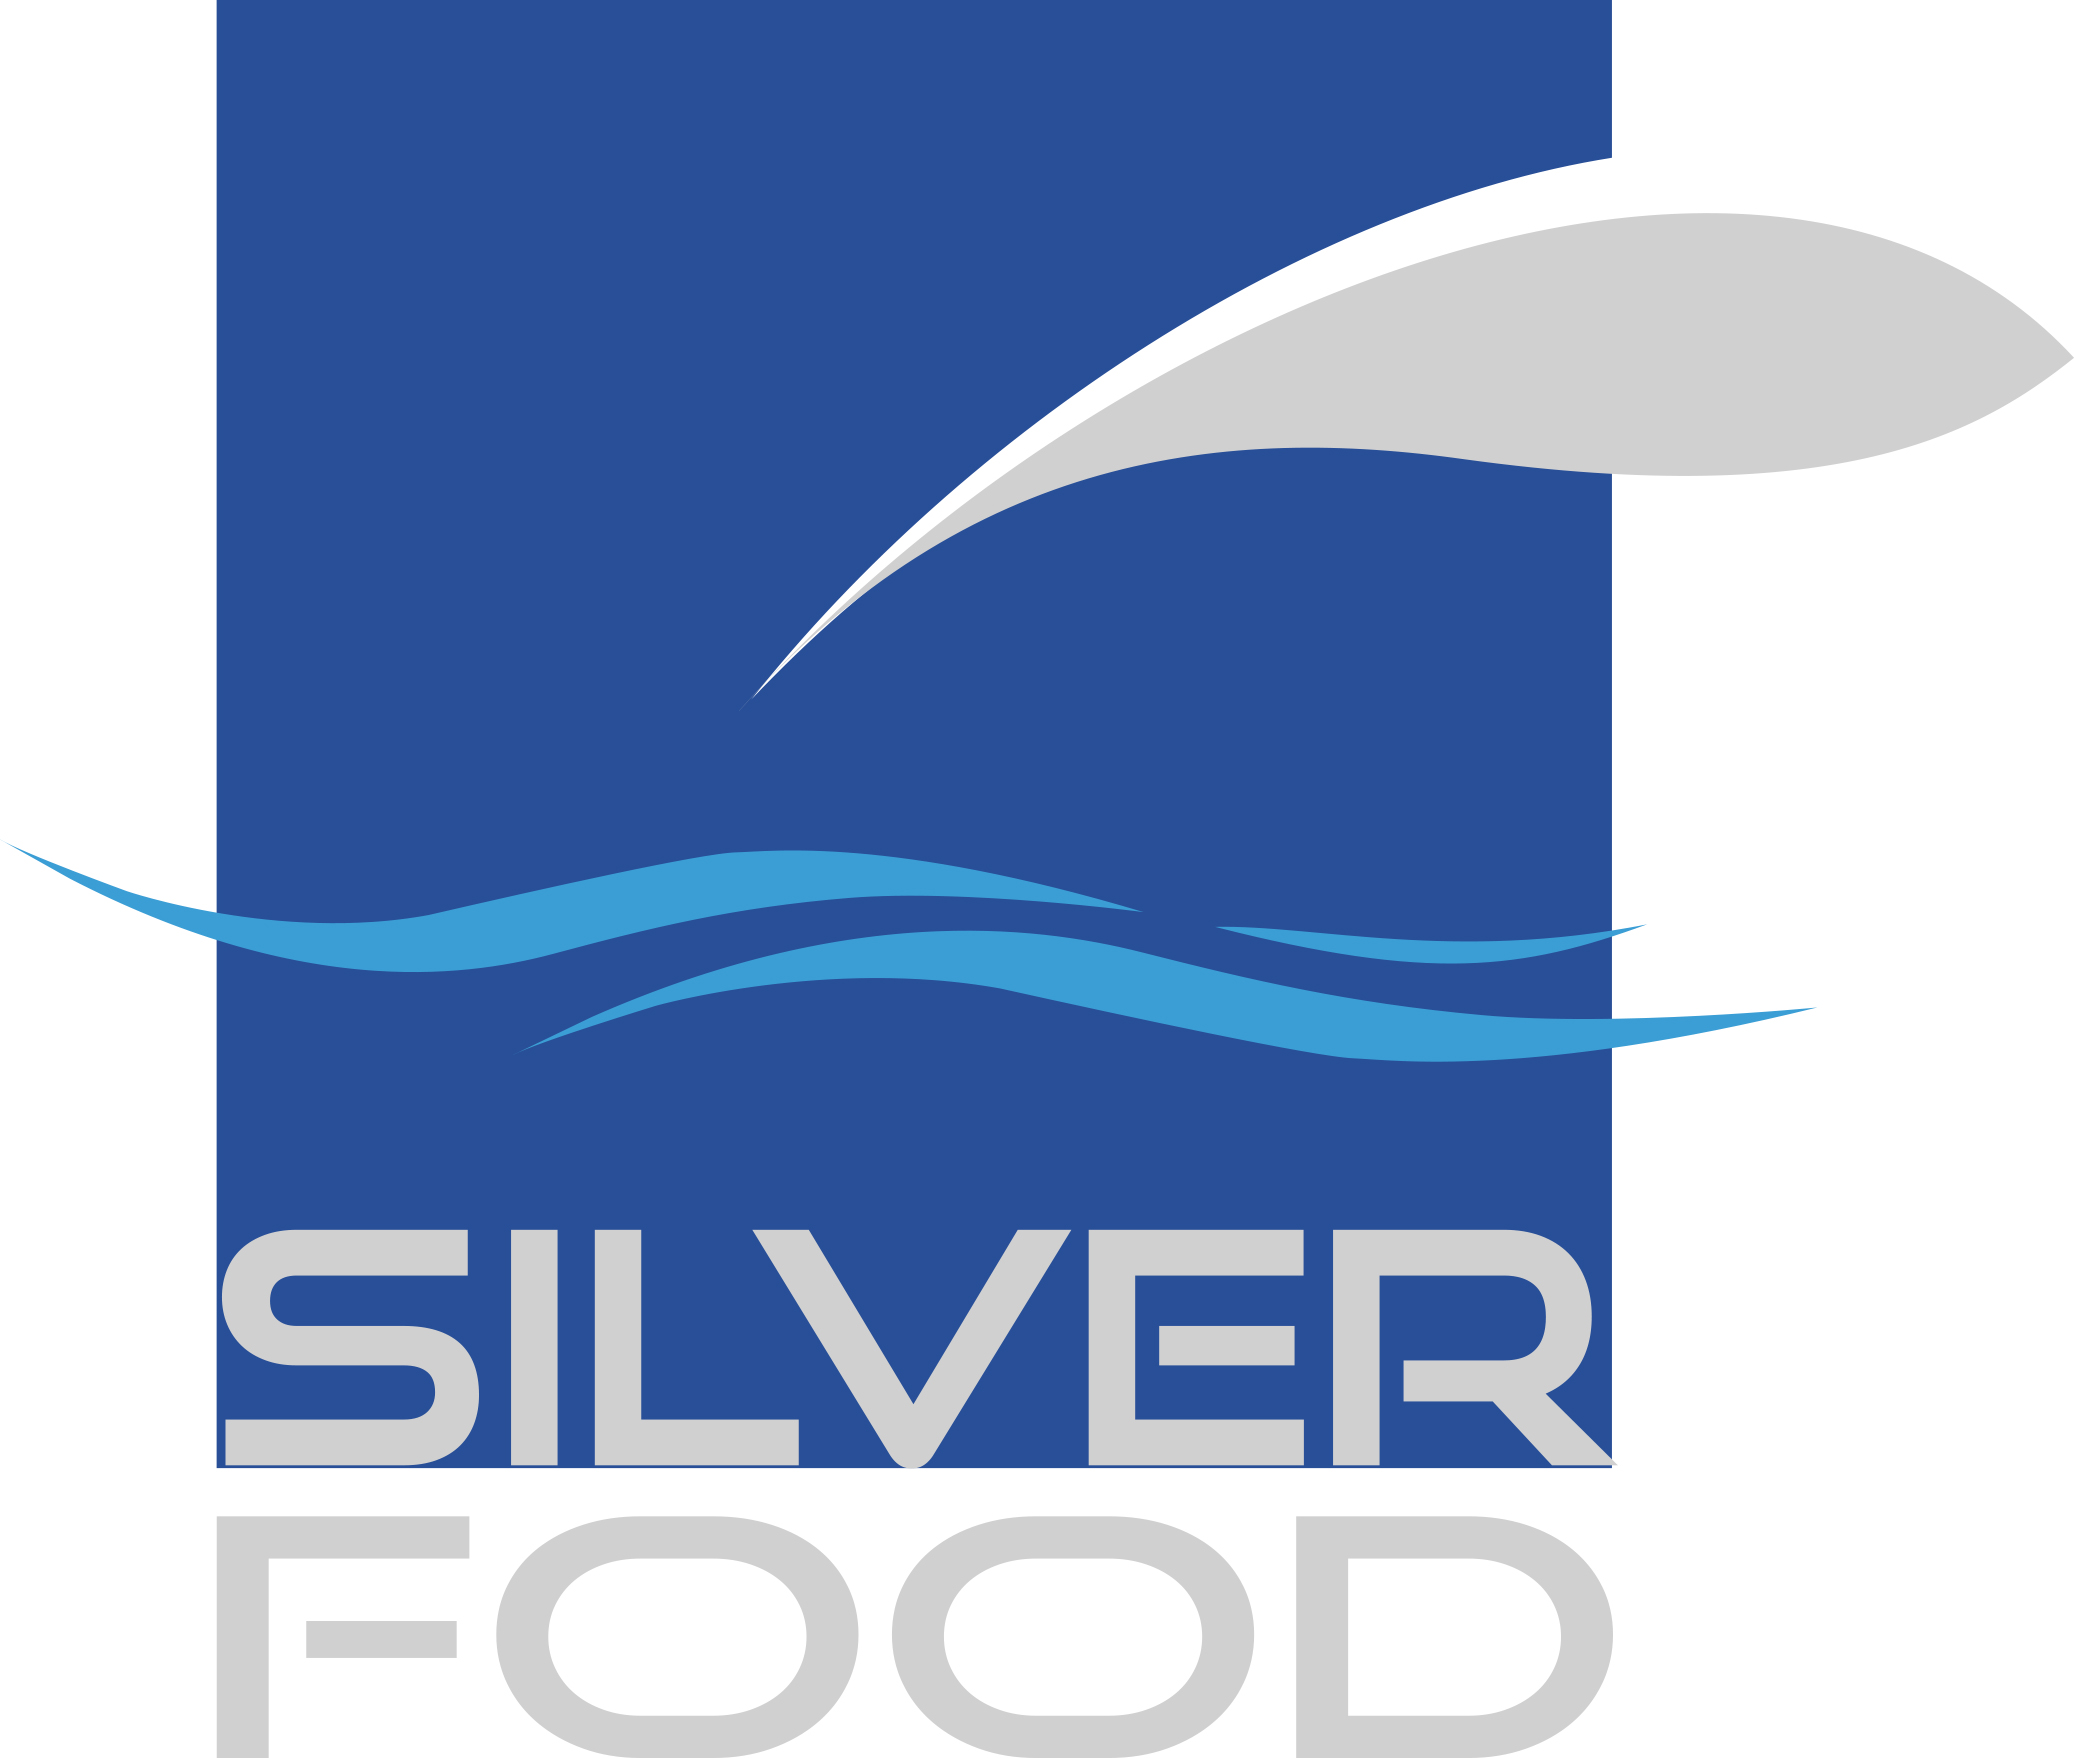 SILVER FOODS